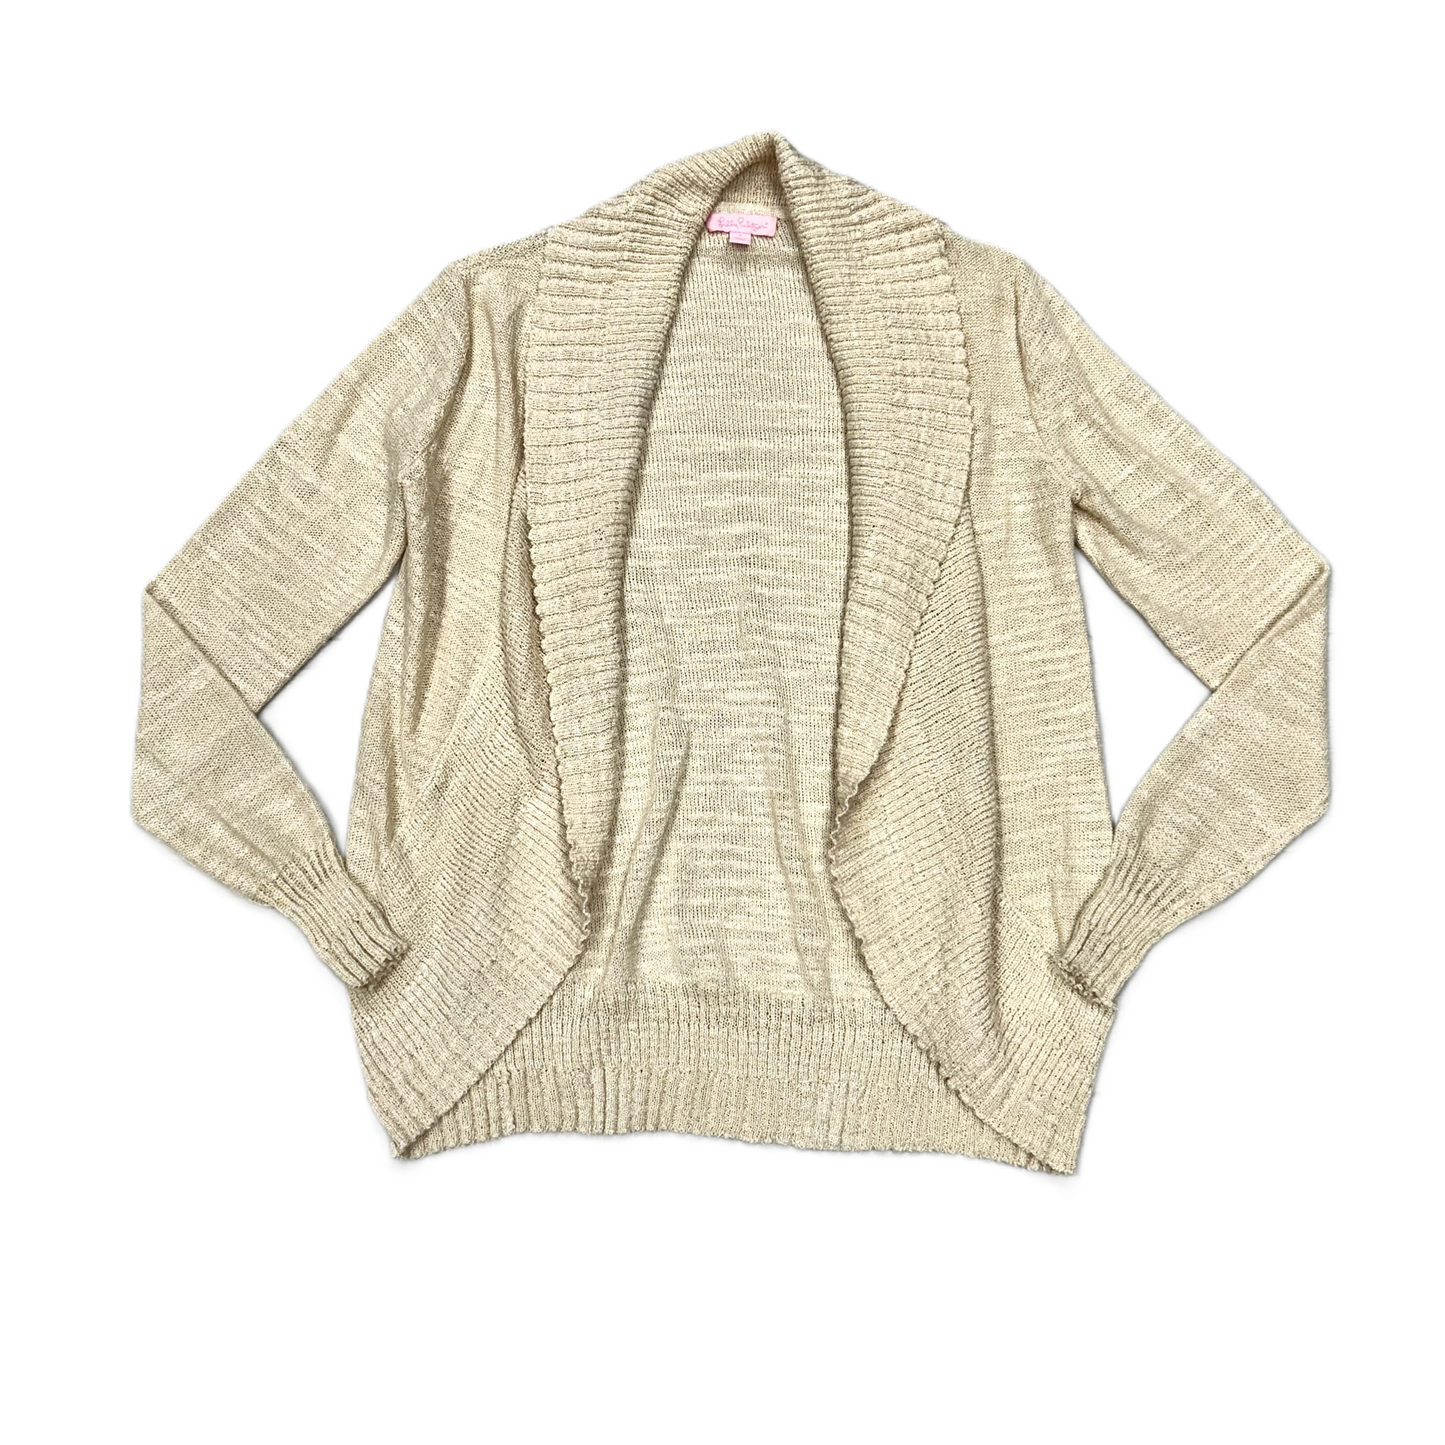 Tan Sweater Designer By Lilly Pulitzer, Size: S